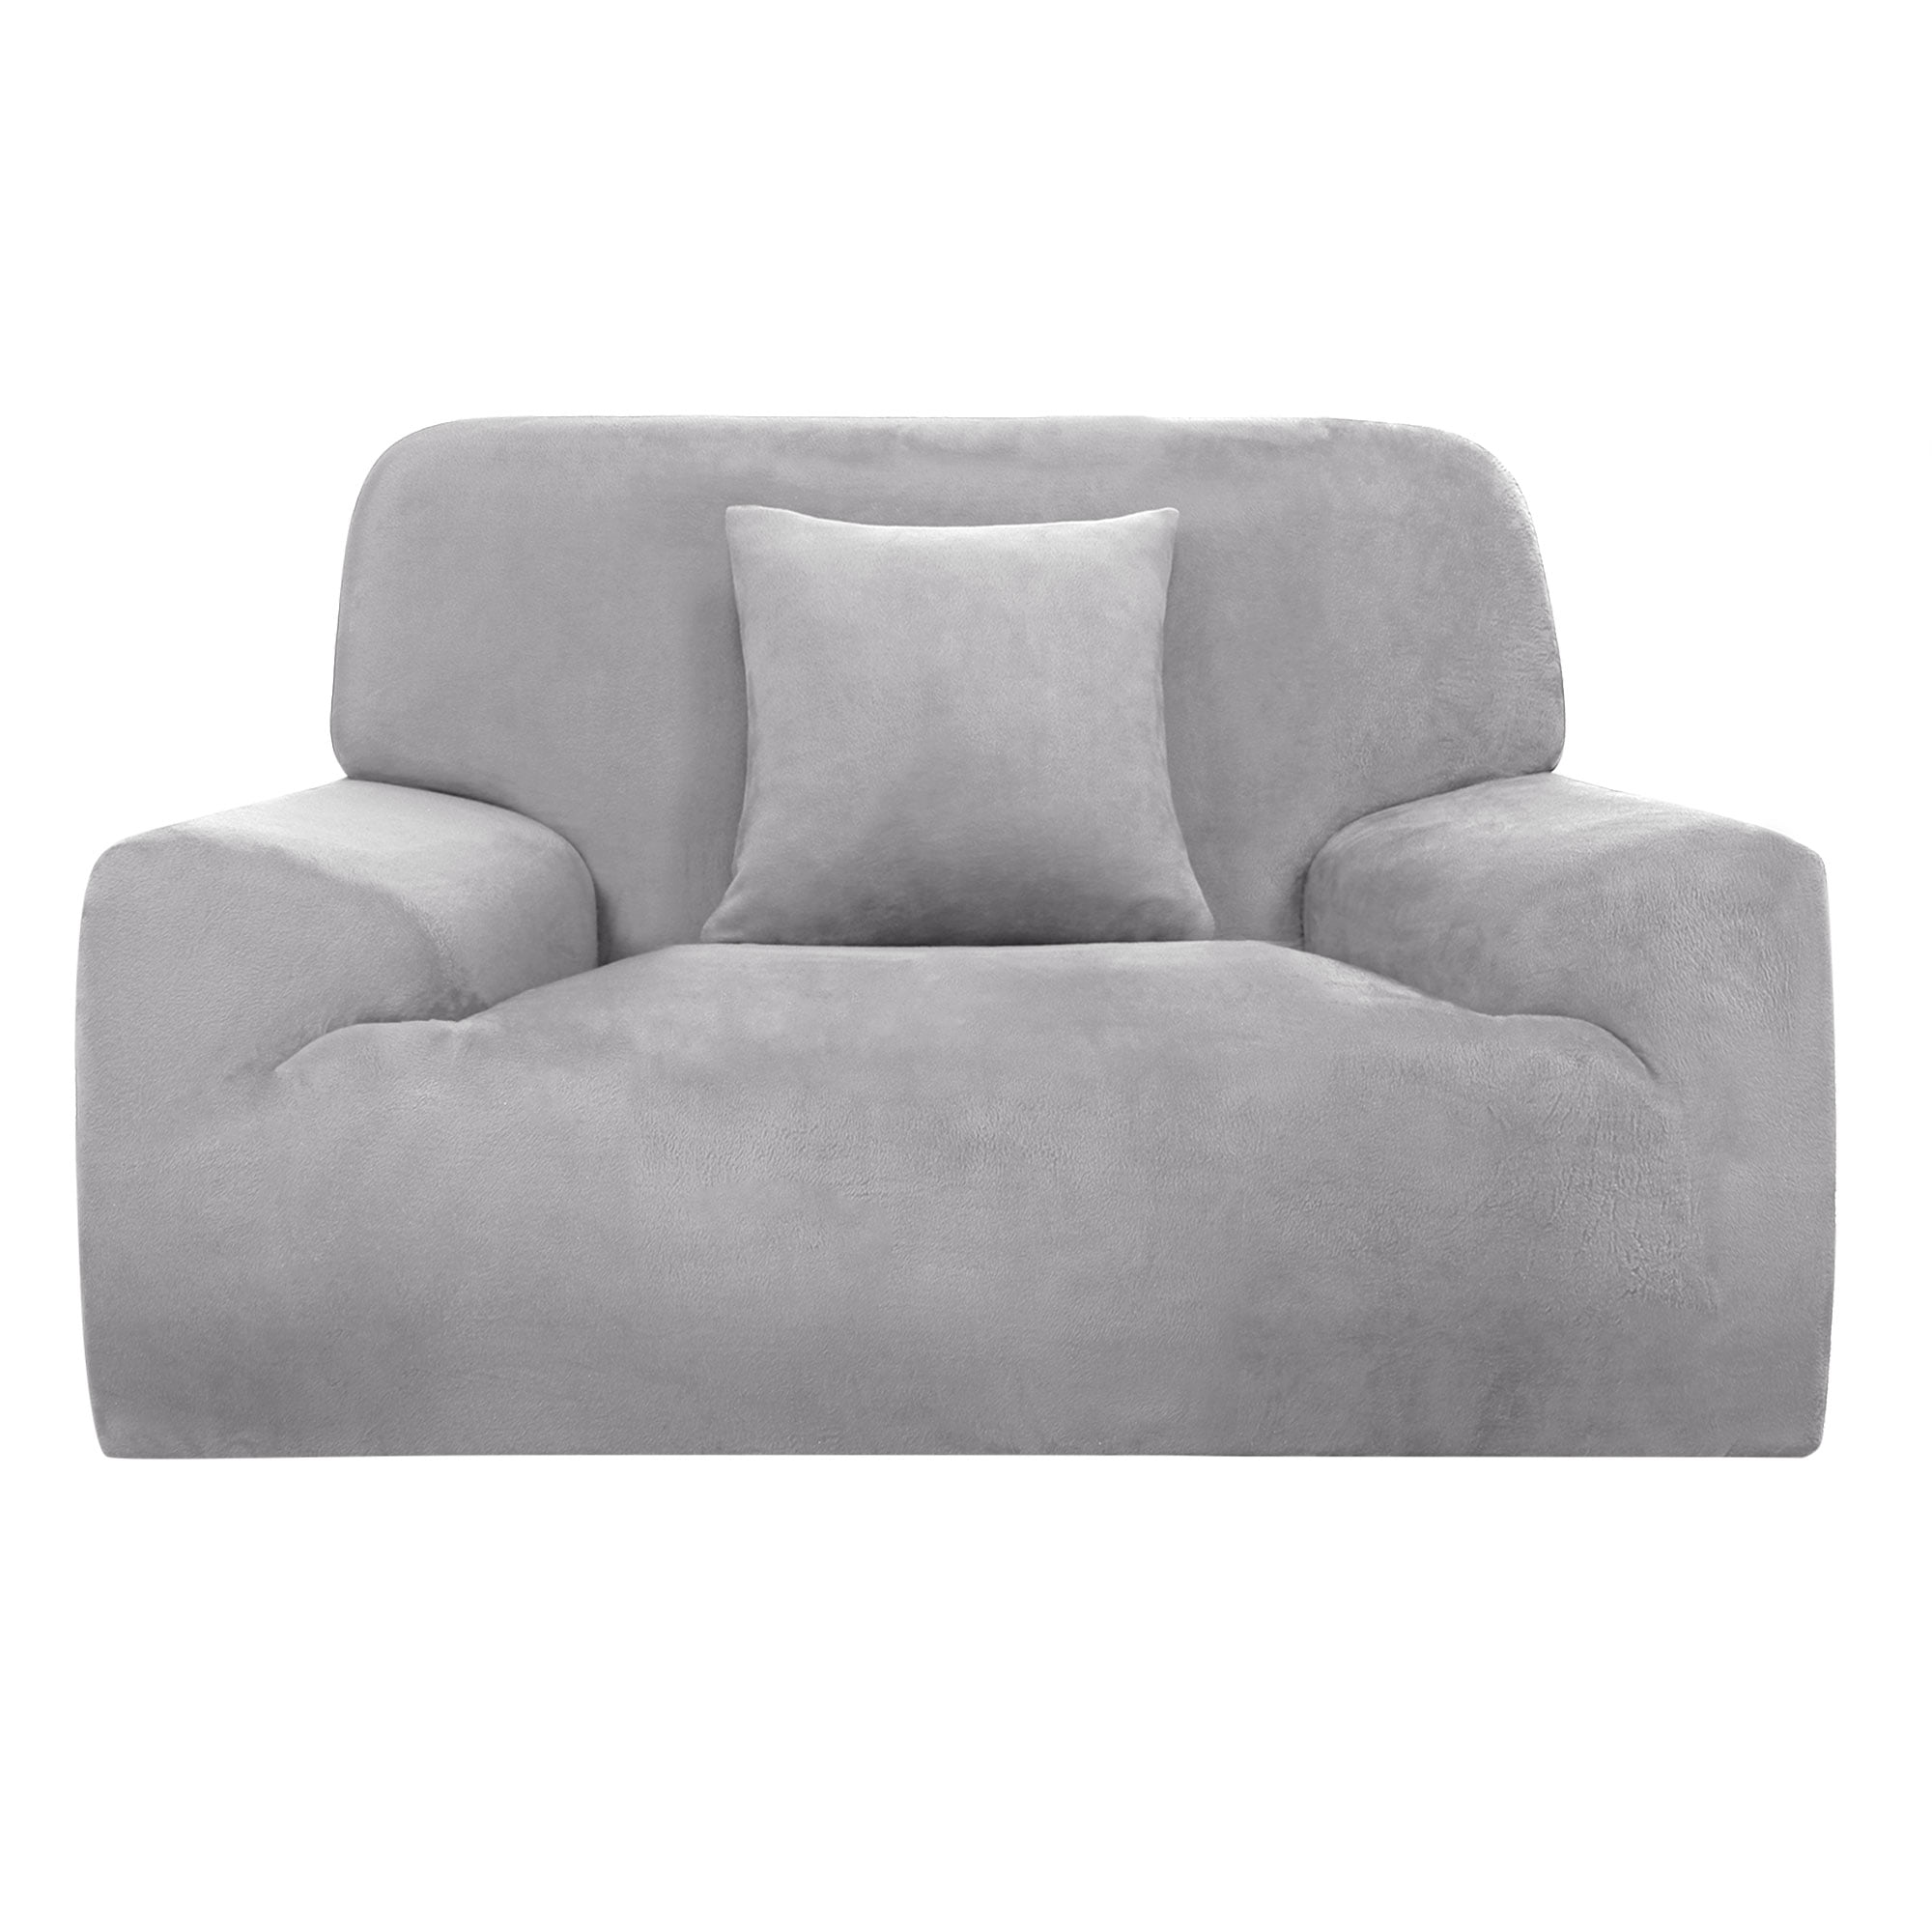 Details about   1/2/3/4 Seat Stretch Spandex Chair Sofa Couch Cover Elastic Slipcover Protector 